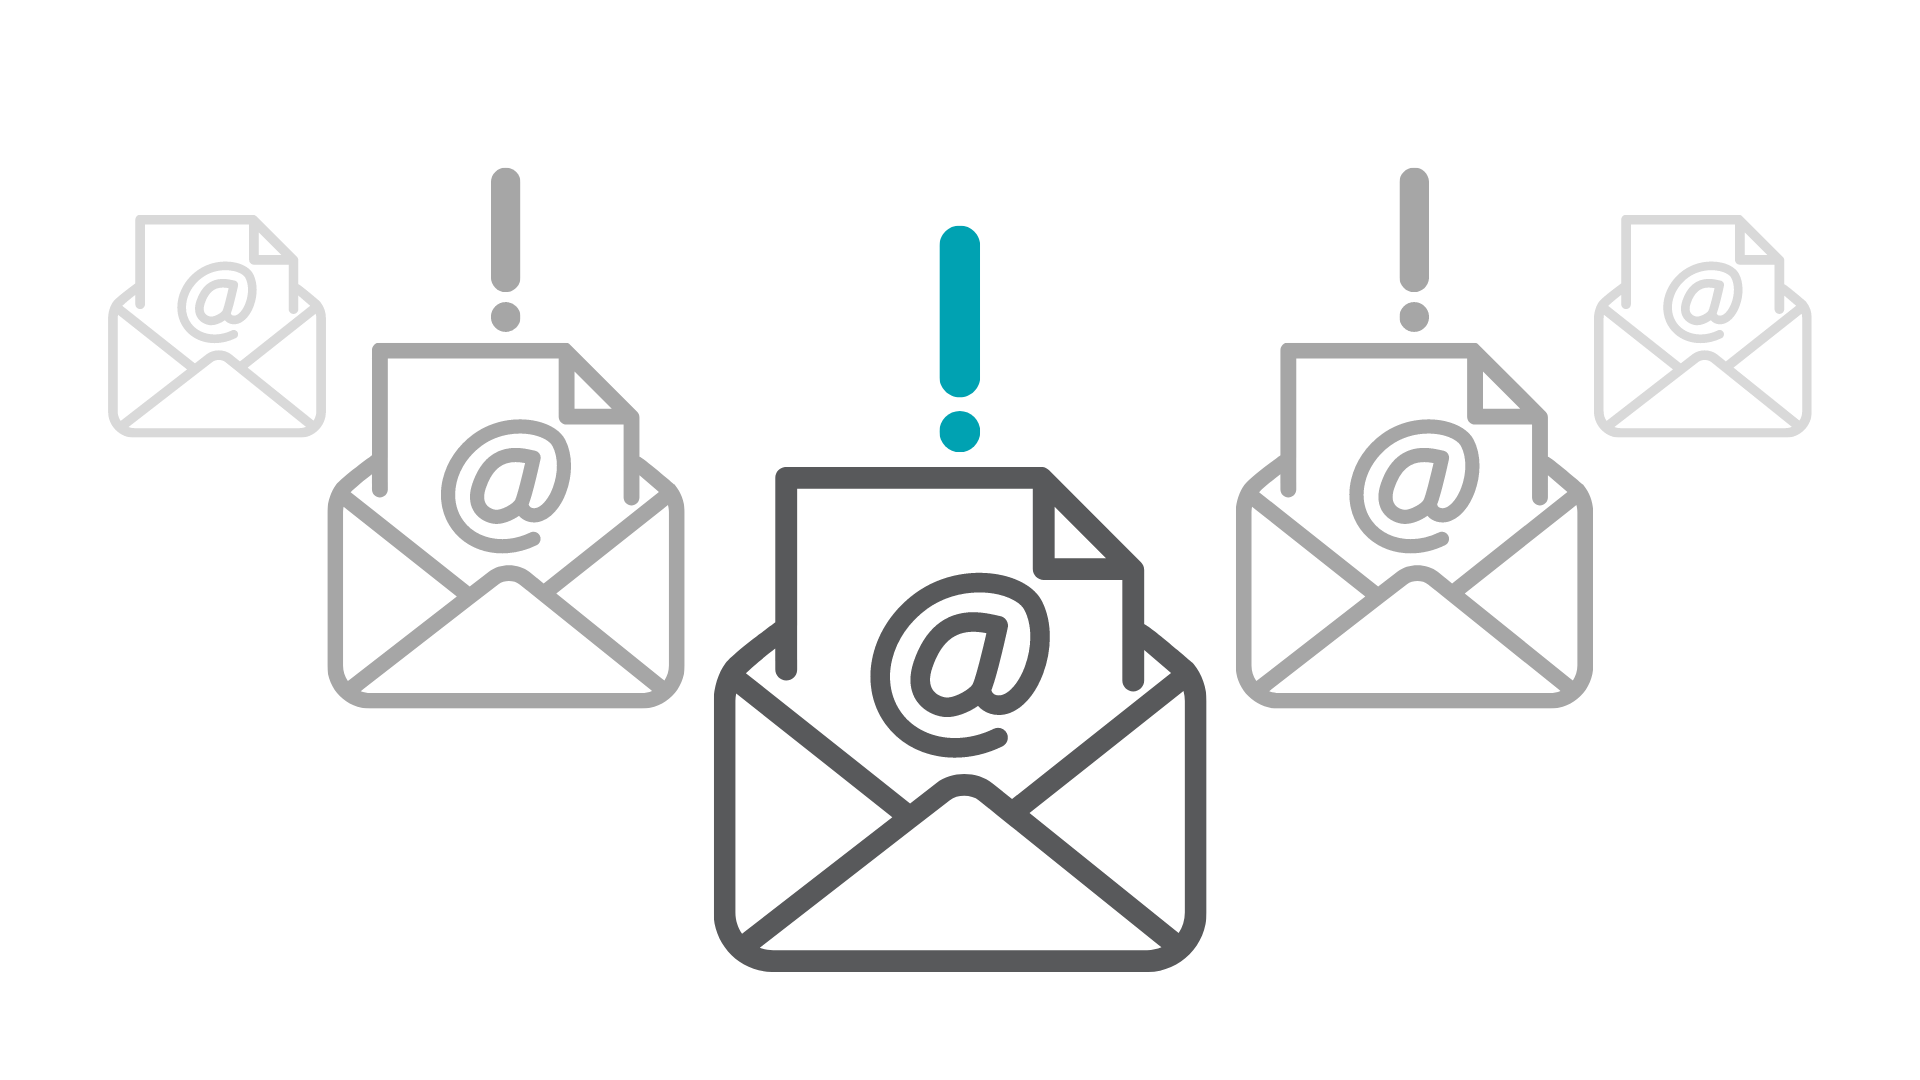 Email marketing and newsletter alerts